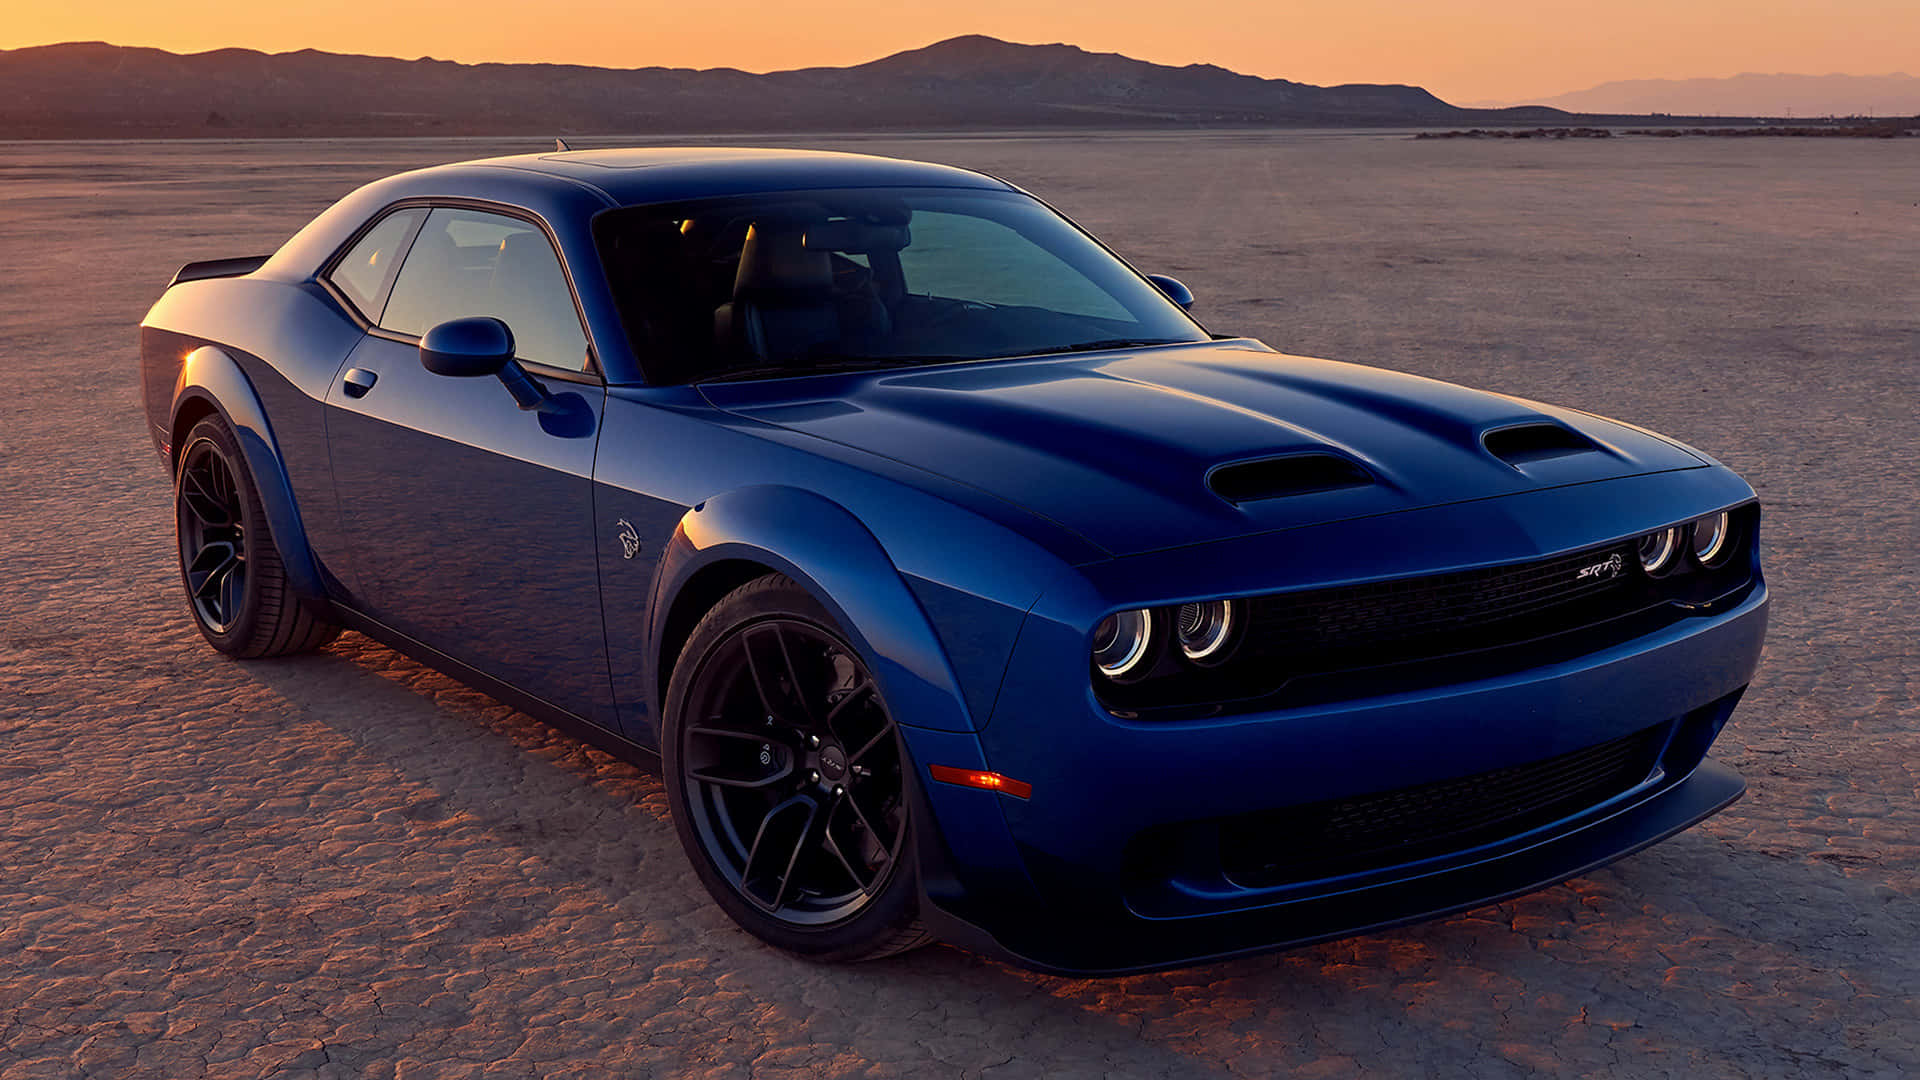 Get Behind The Power Of The Hellcat